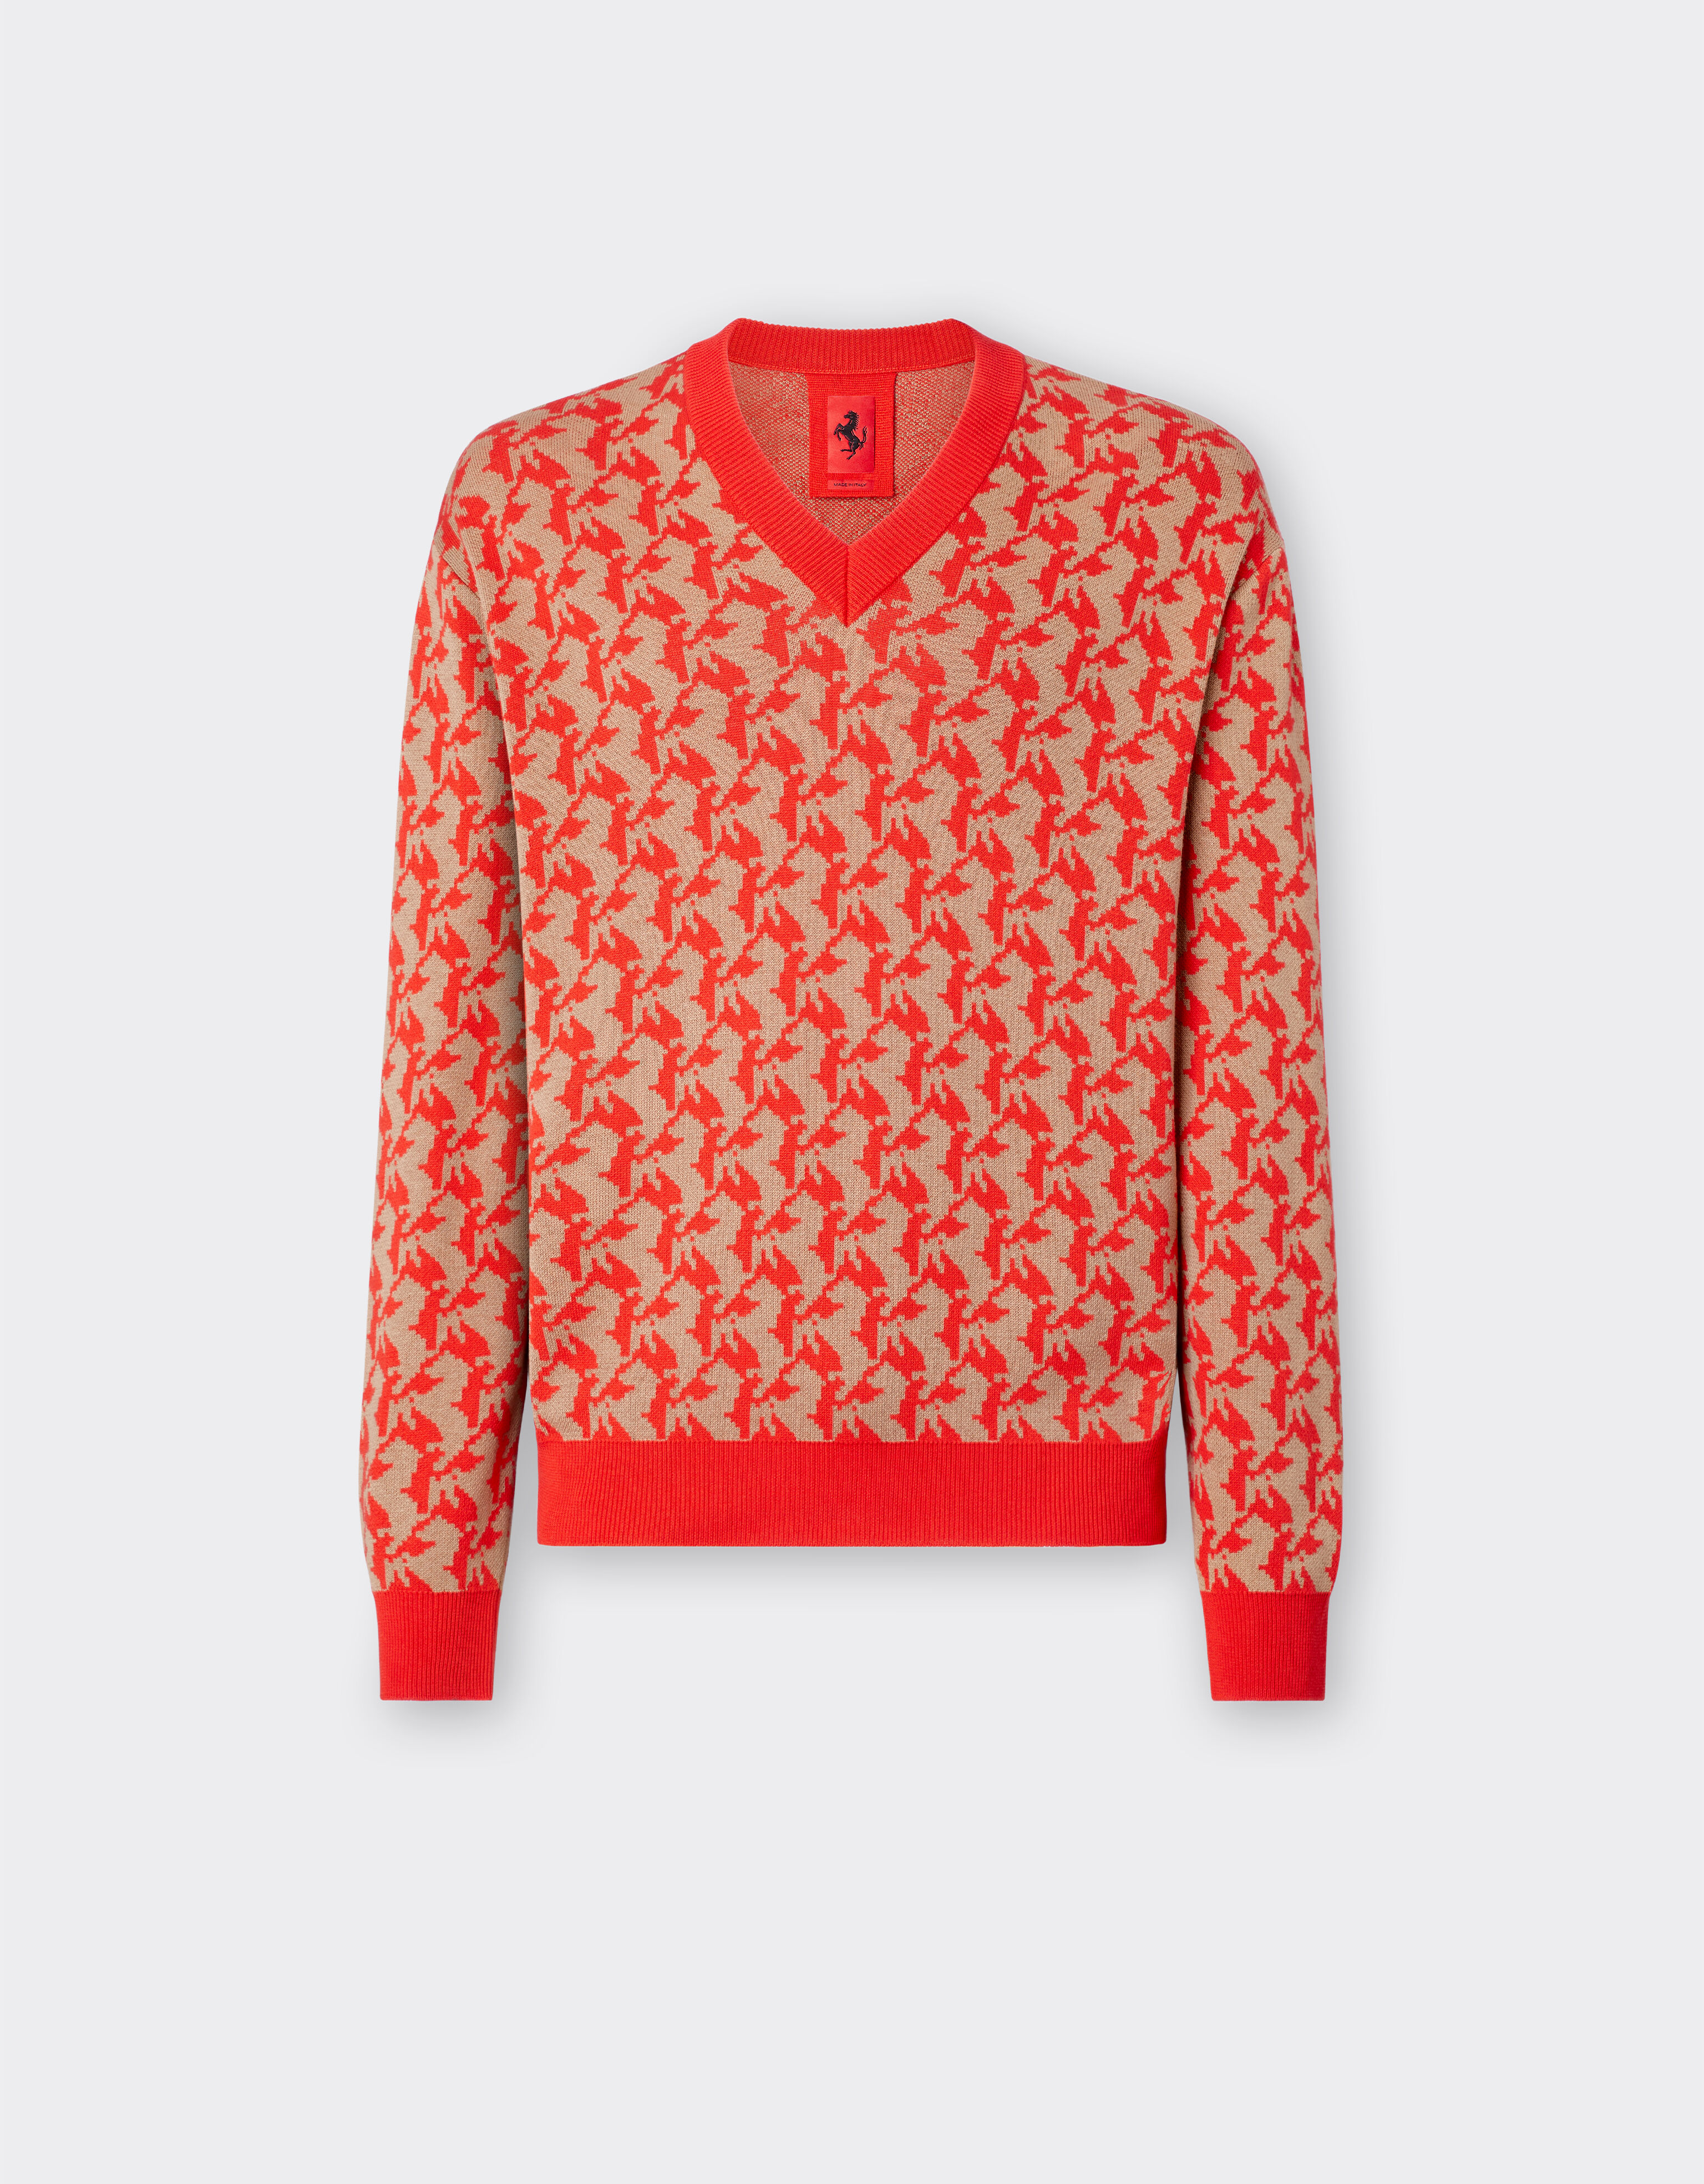 Ferrari Jumper in silk and cotton with Prancing Horse pattern Rosso Dino 47566f